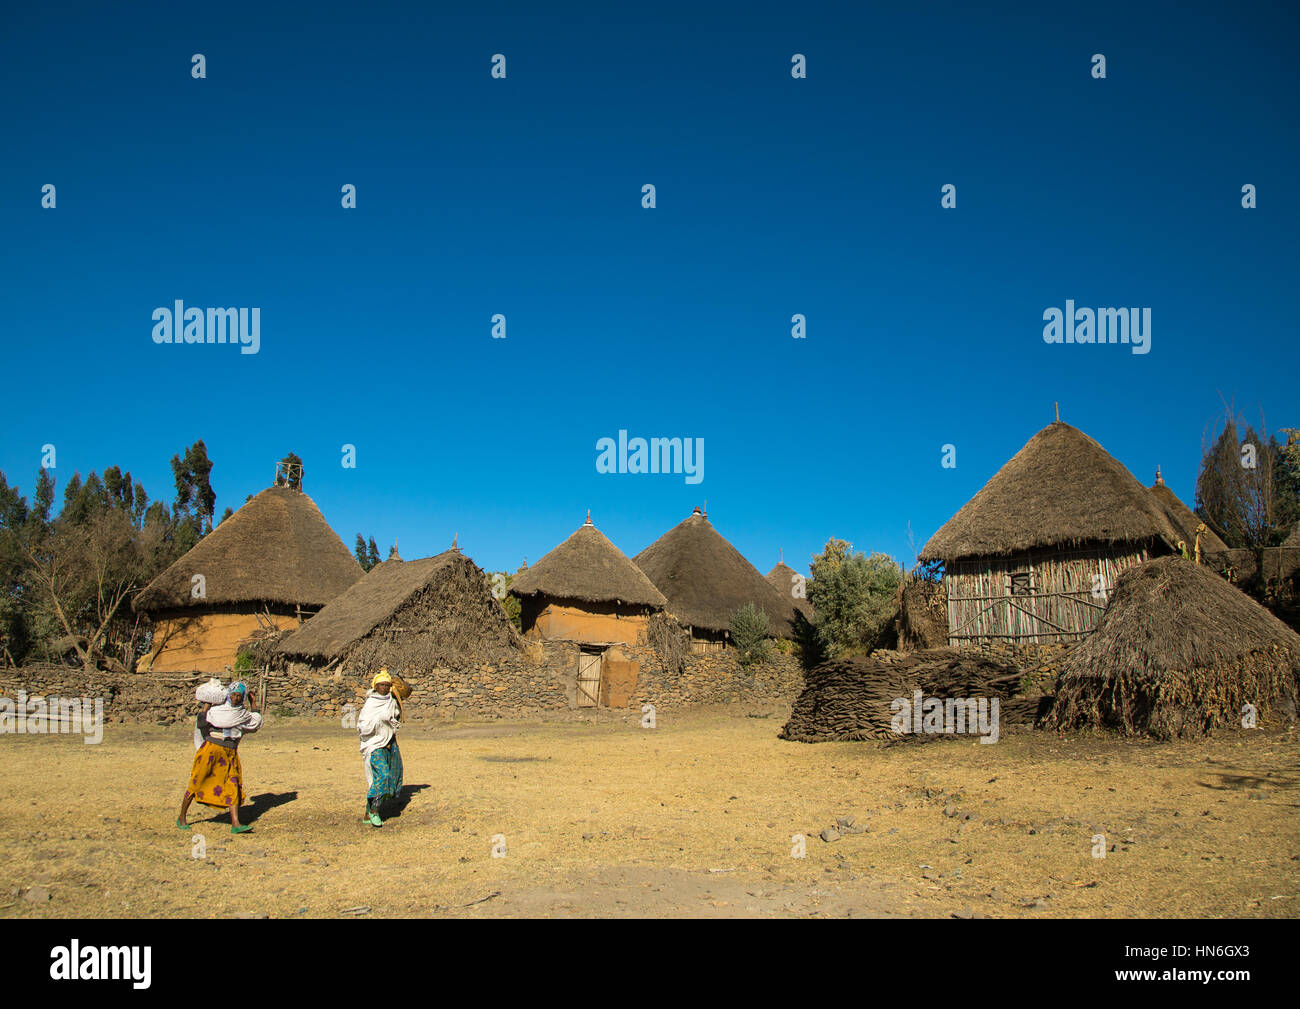 Two ethiopian women passing in front of stone houses village in the highlands, Amhara region, Debre Birhan, Ethiopia Stock Photo